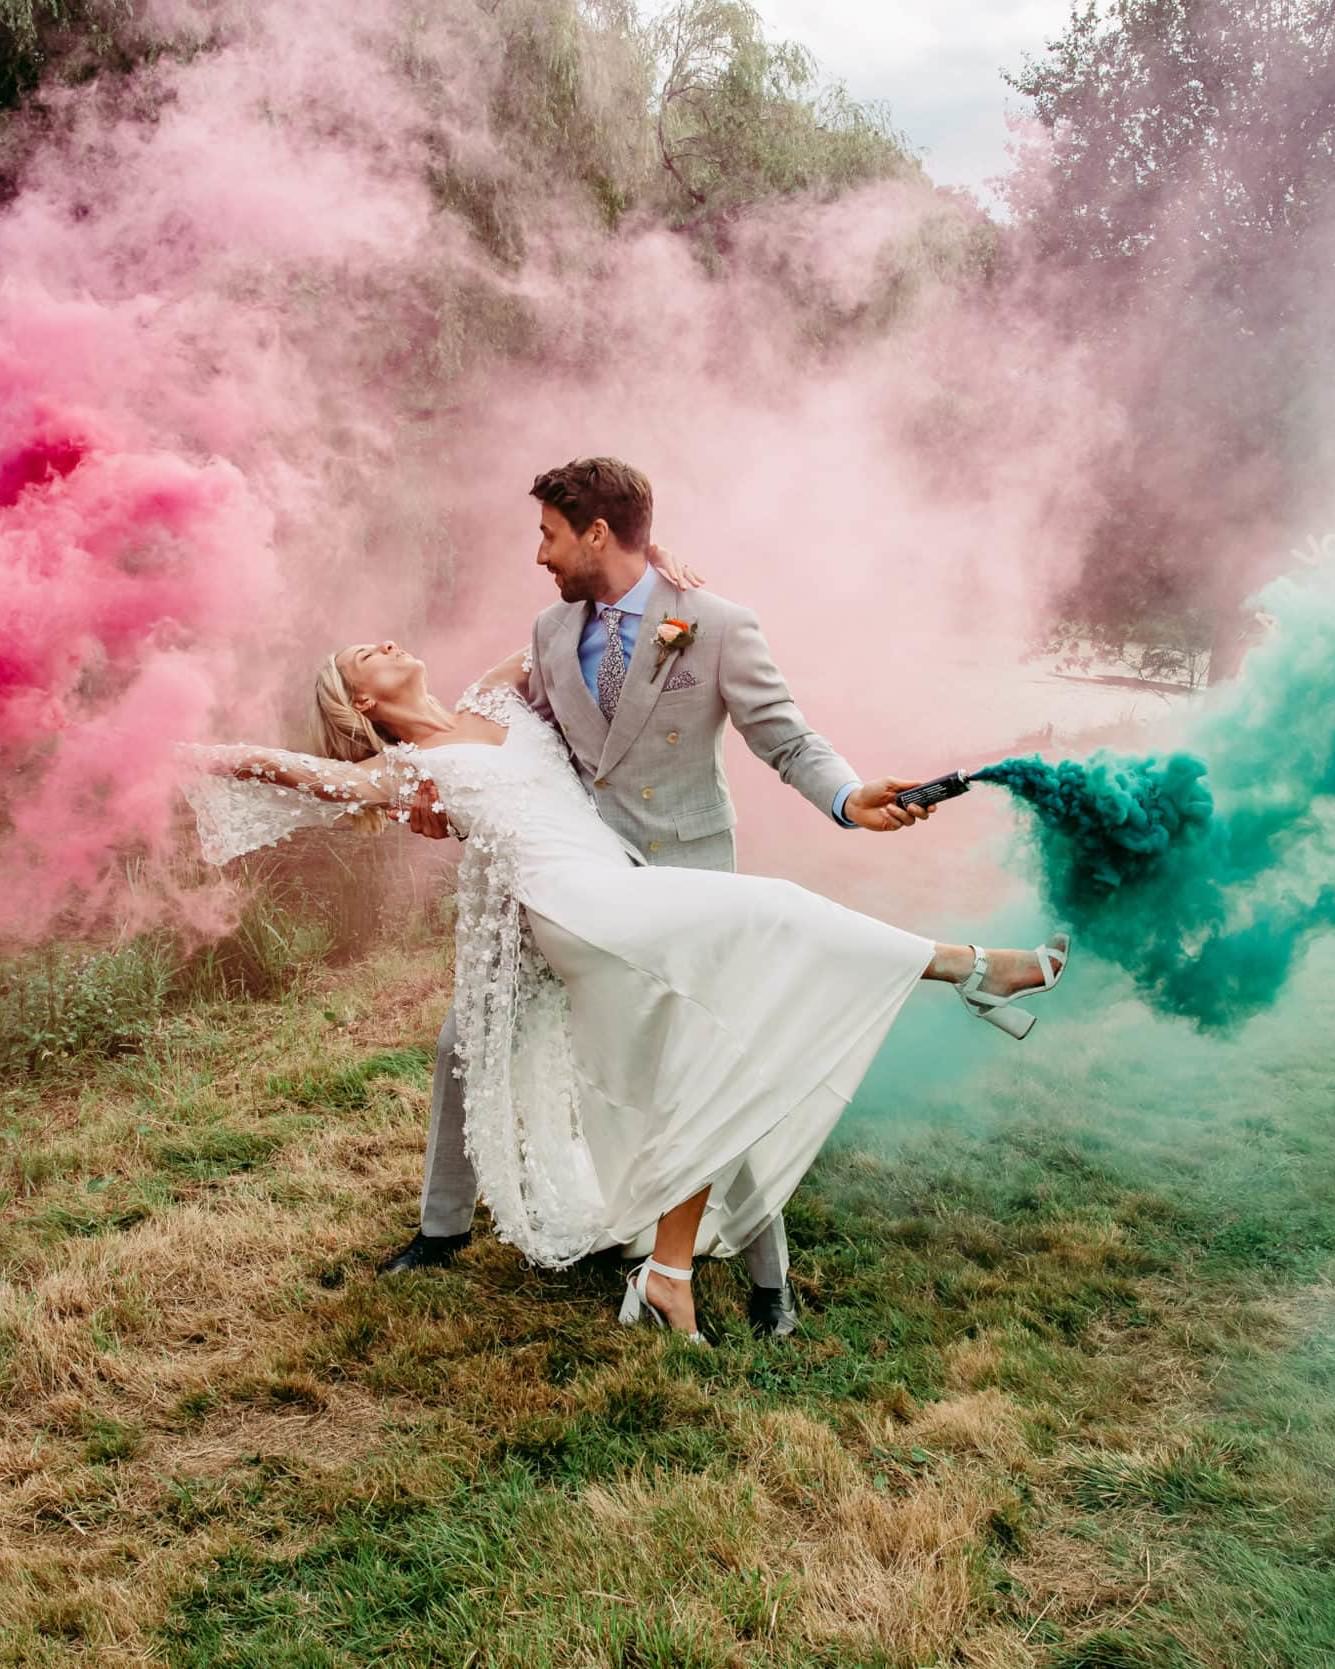 Bride been swept off her sweep, with green and pink smke grenades in their hands